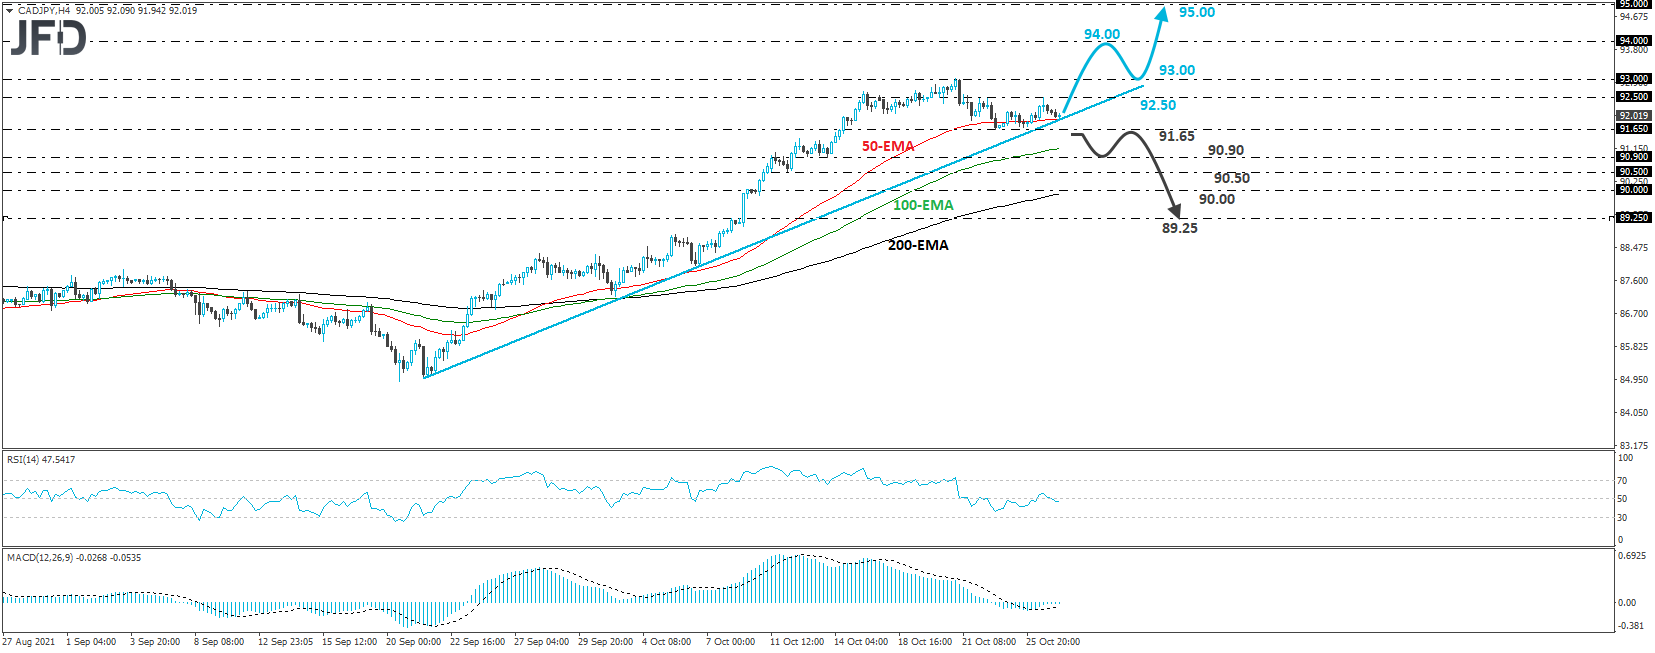 CAD/JPY 4-hour chart technical analysis.